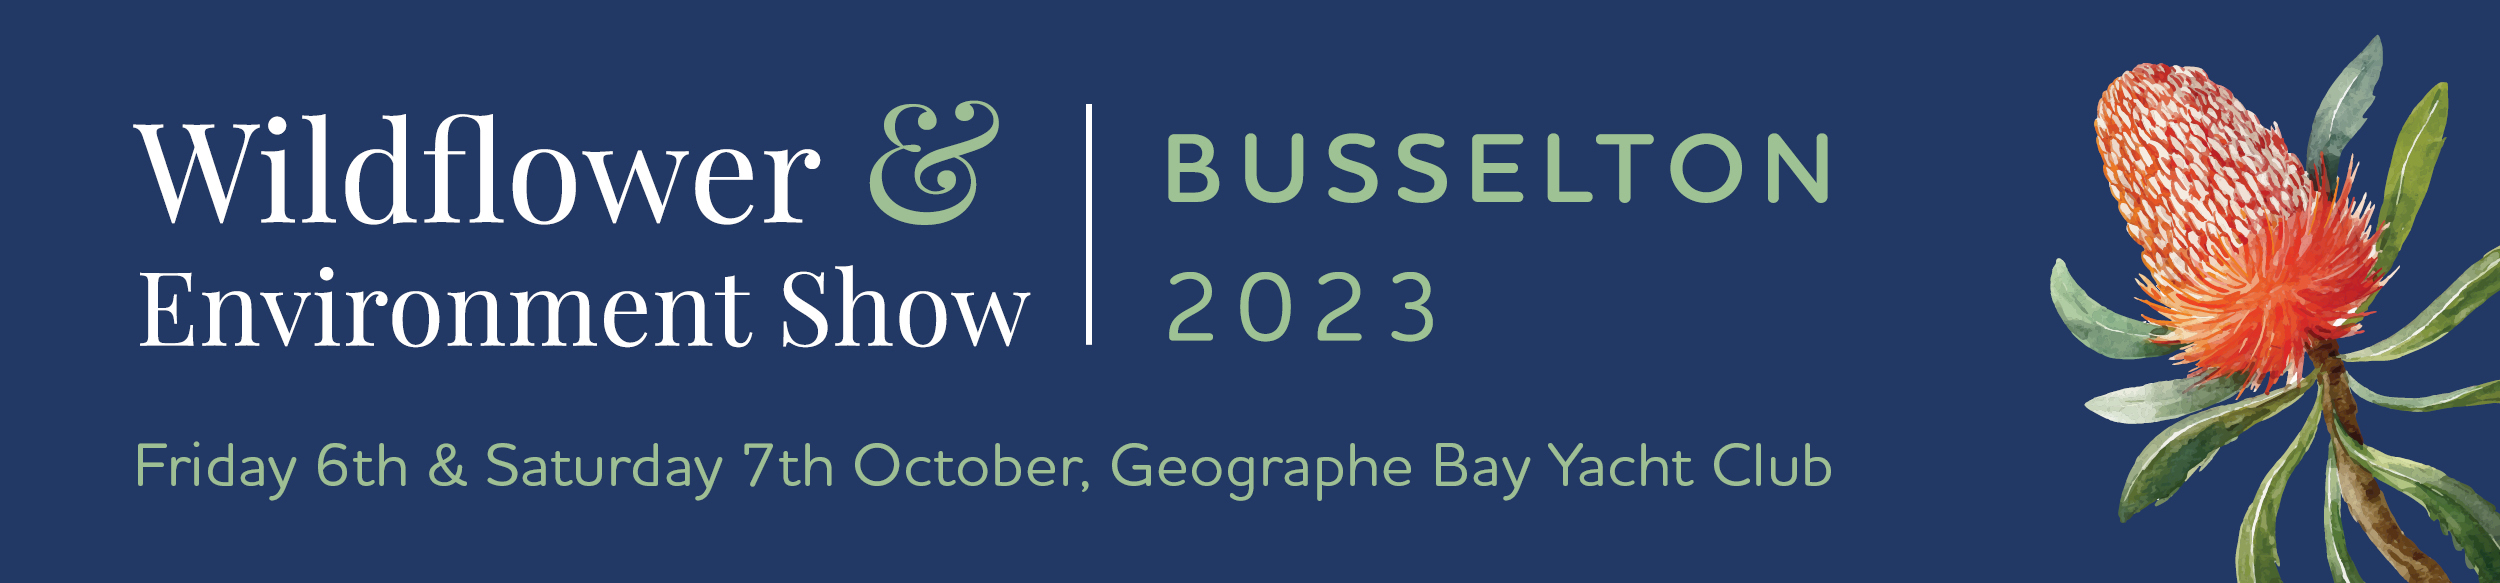 Logo and date for Busselton Wildflower & Environment Show 2023